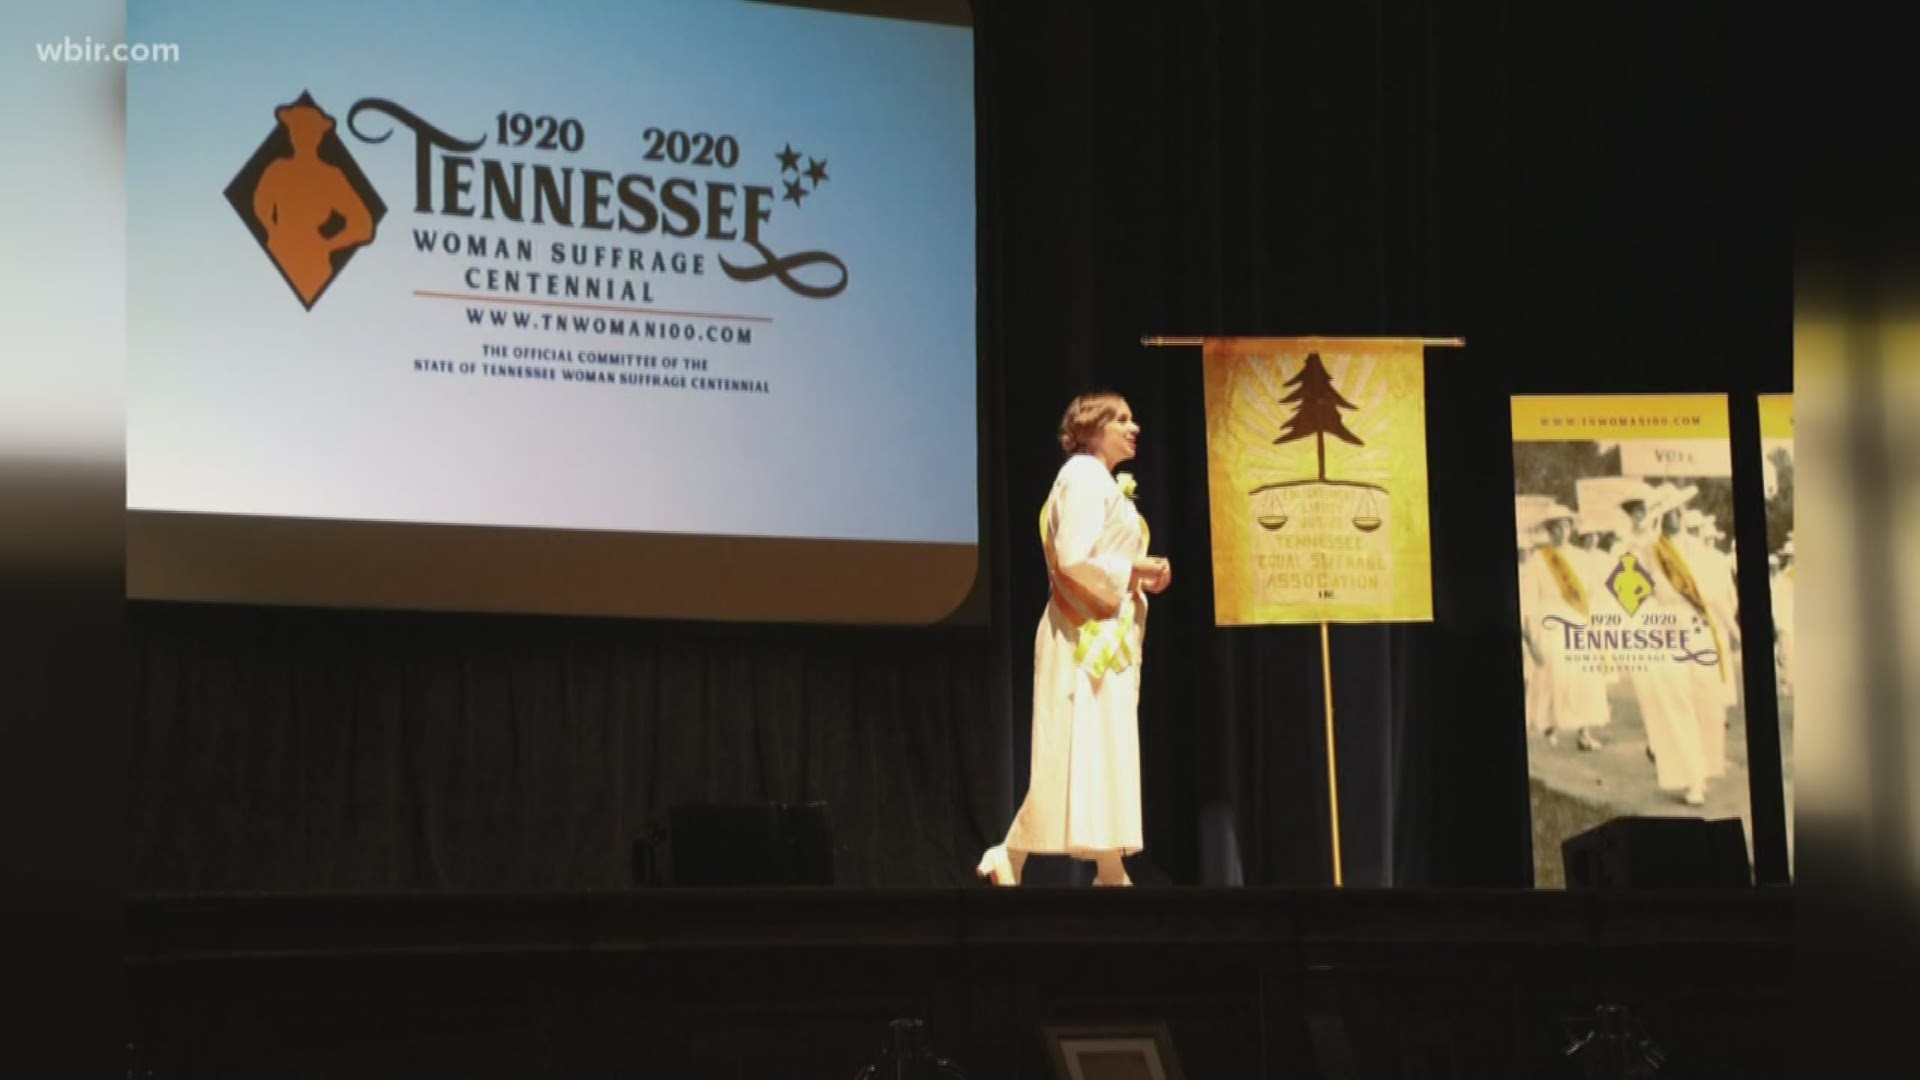 State leaders kicked off a yearlong celebration to commemorate the 100th Anniversary of Women's Suffrage in Tennessee.